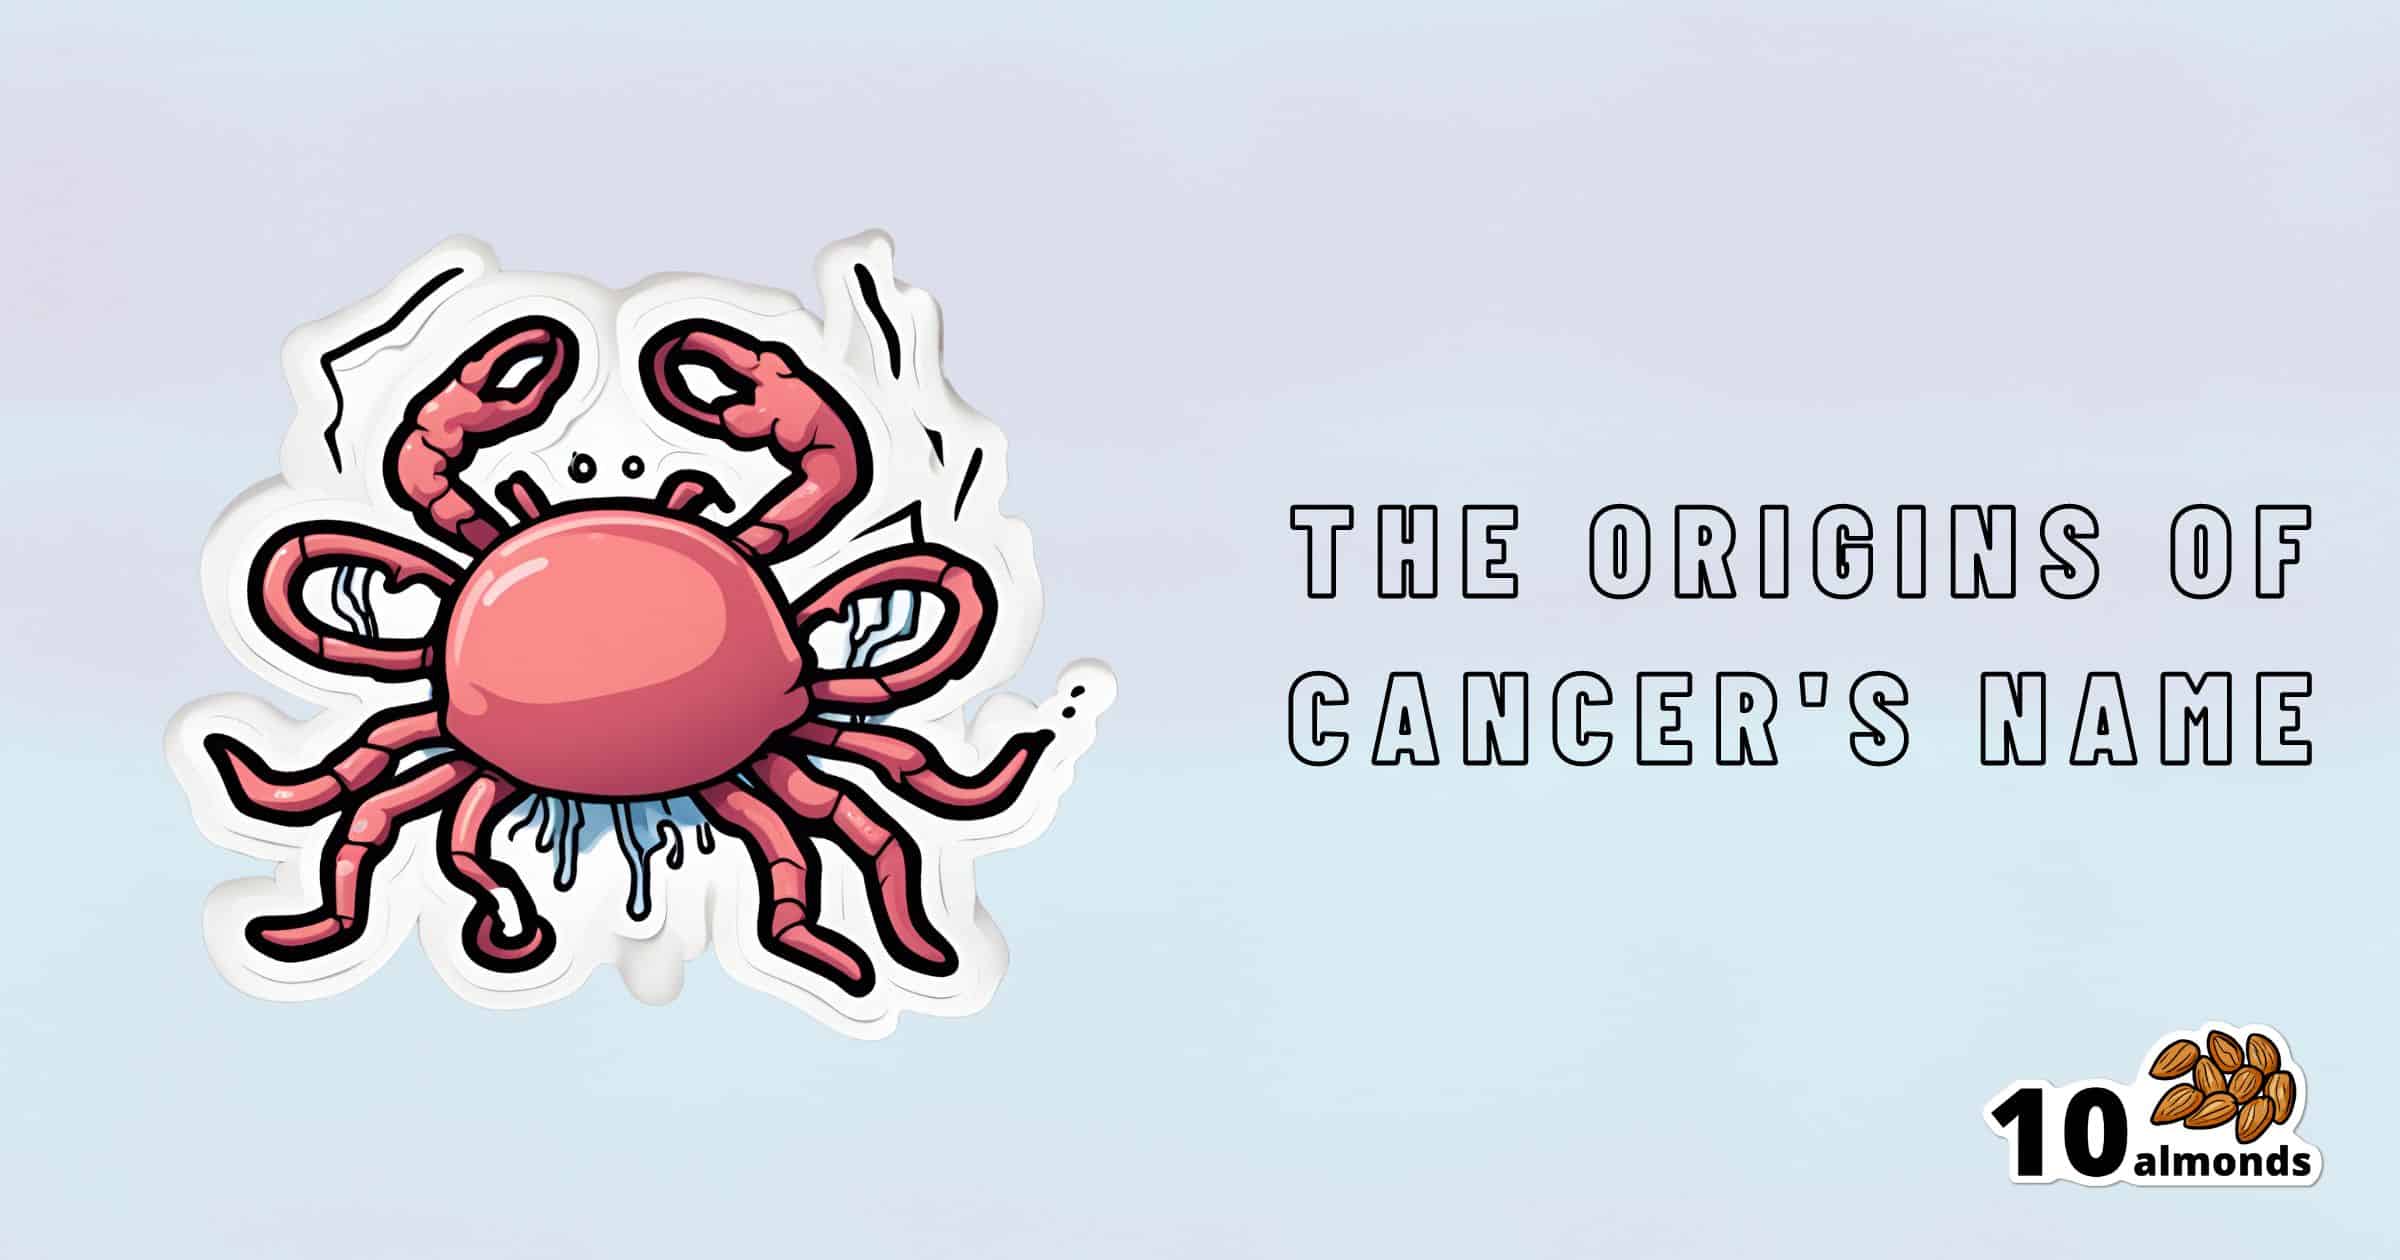 Cartoon illustration of a crab with an orange-red shell and pink legs on a light blue background. The text "The Origins of Cancer's Name" is displayed to the right, hinting at its Greco-Roman roots. The "10 almonds" logo is in the bottom-right corner.